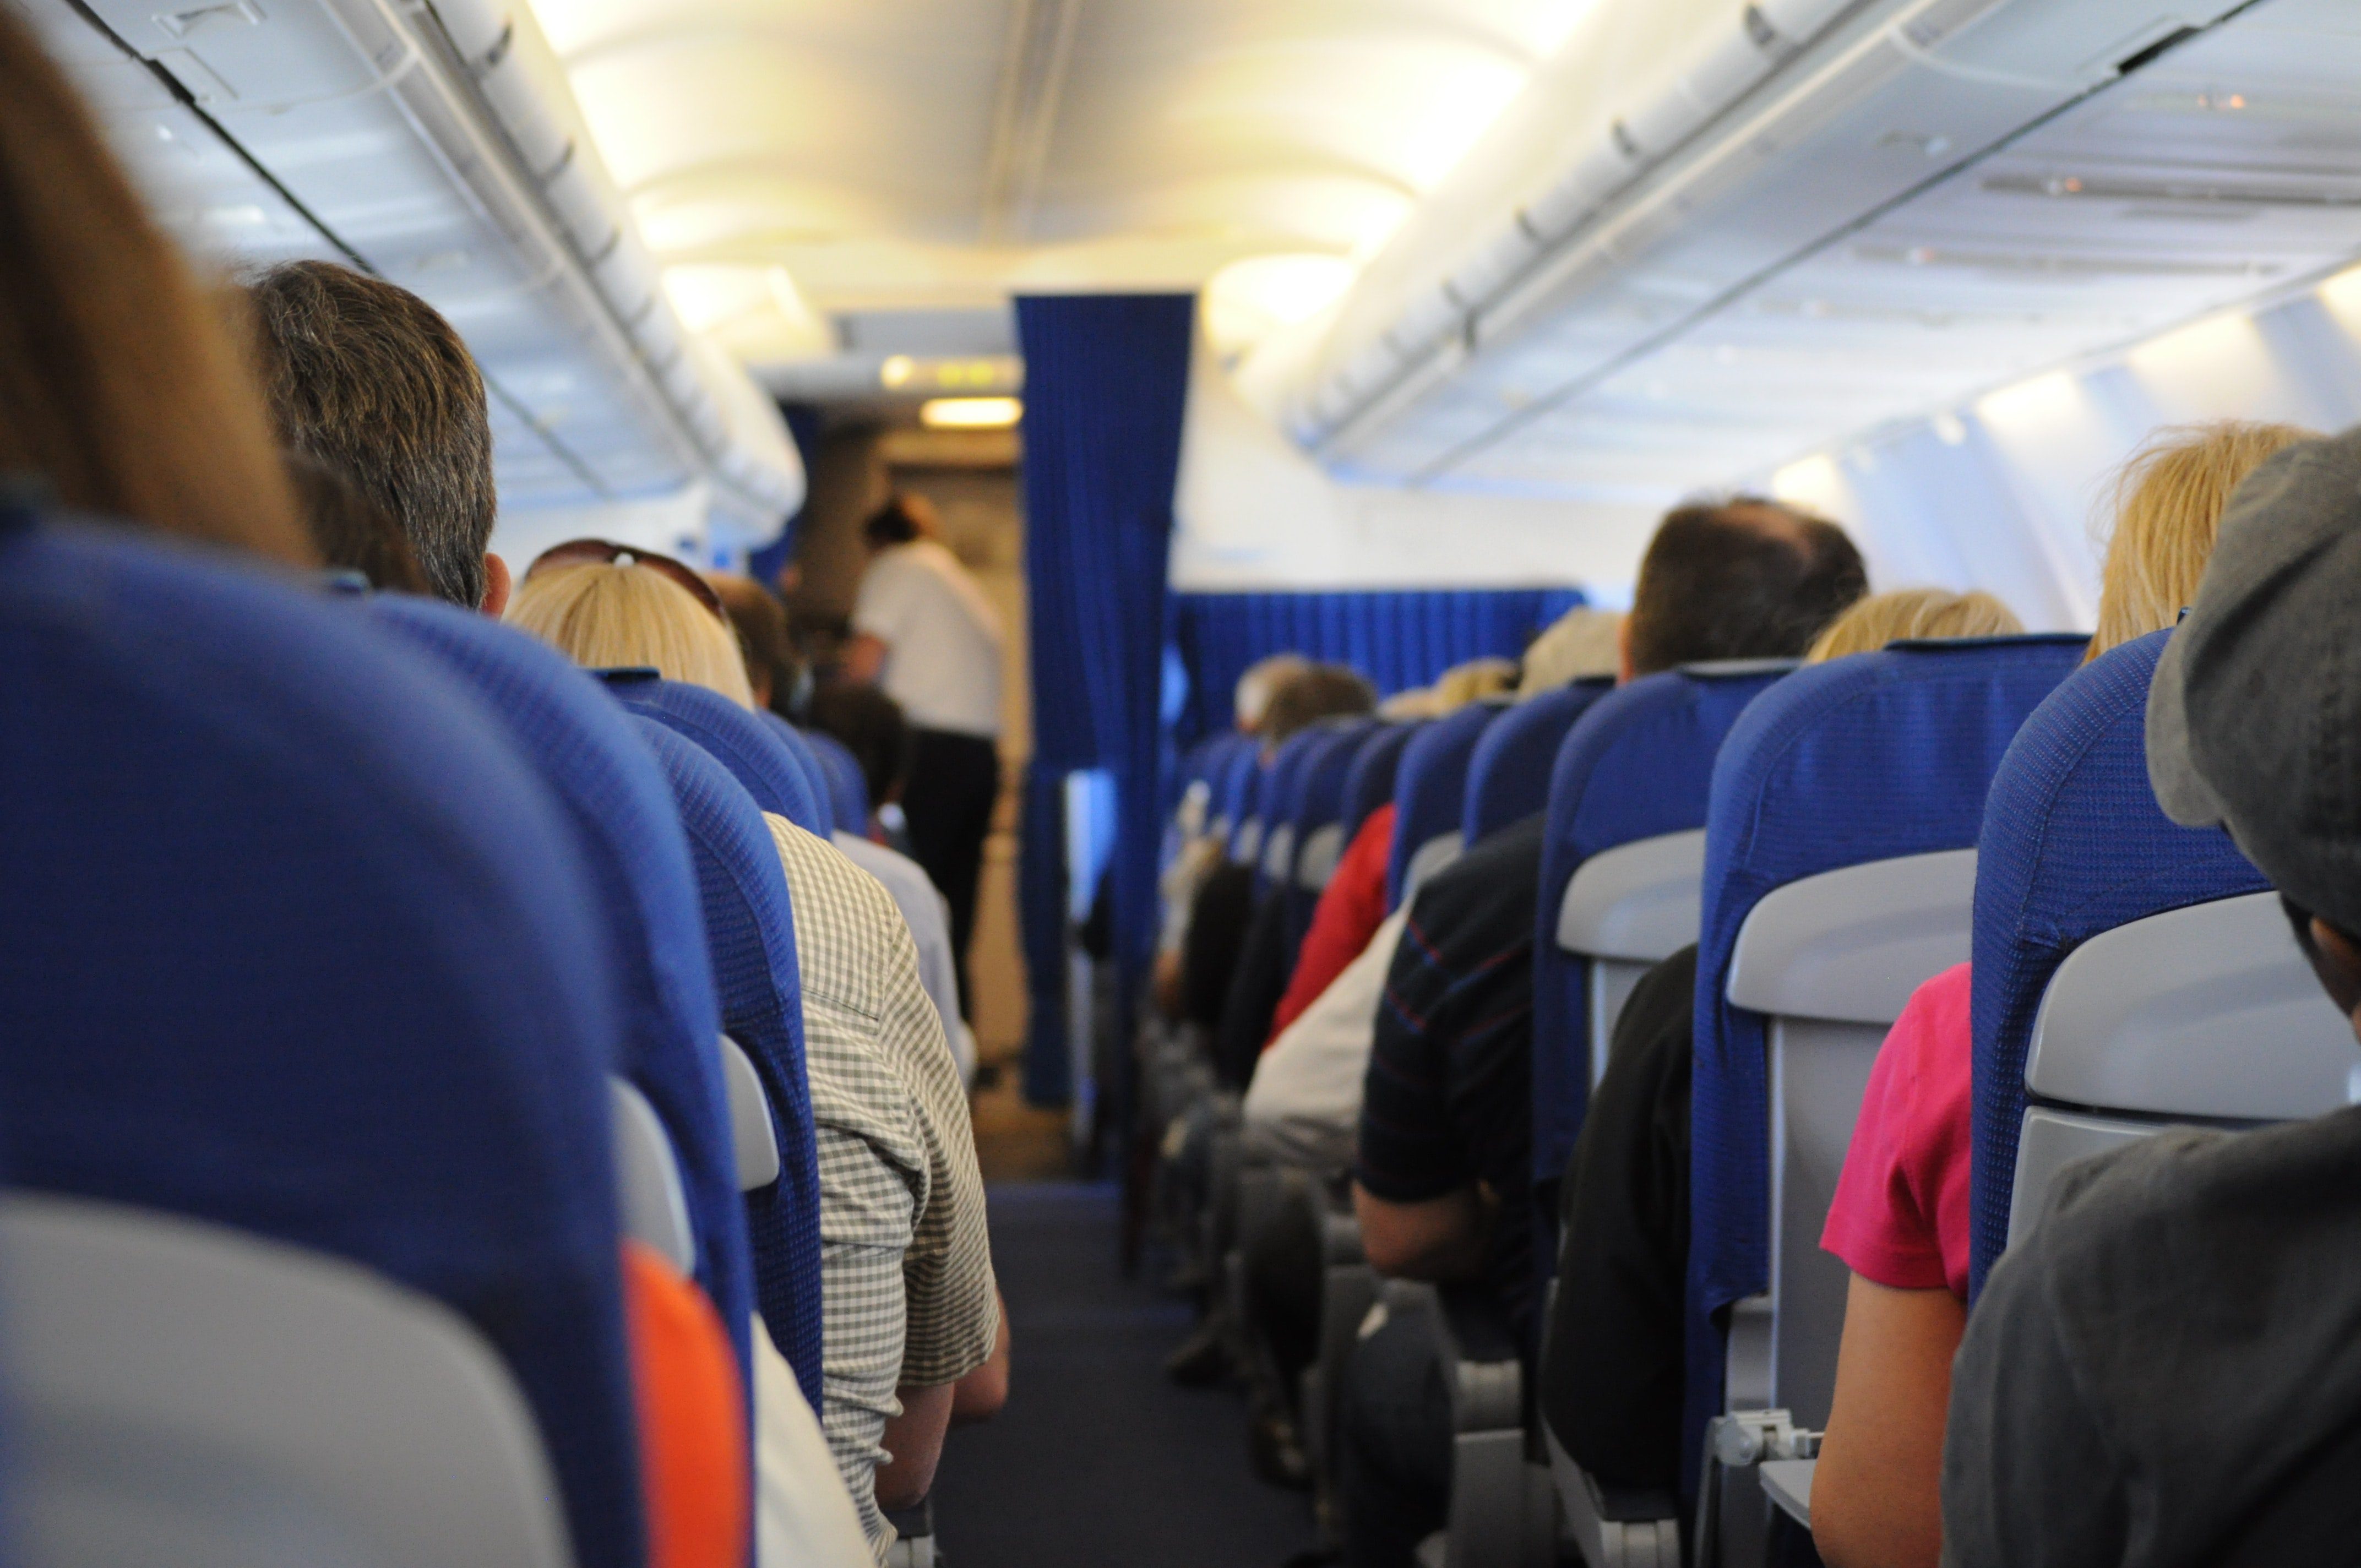 Couple Caught On Video Joining The Mile High Club While In Their Own Seats Your Mileage May